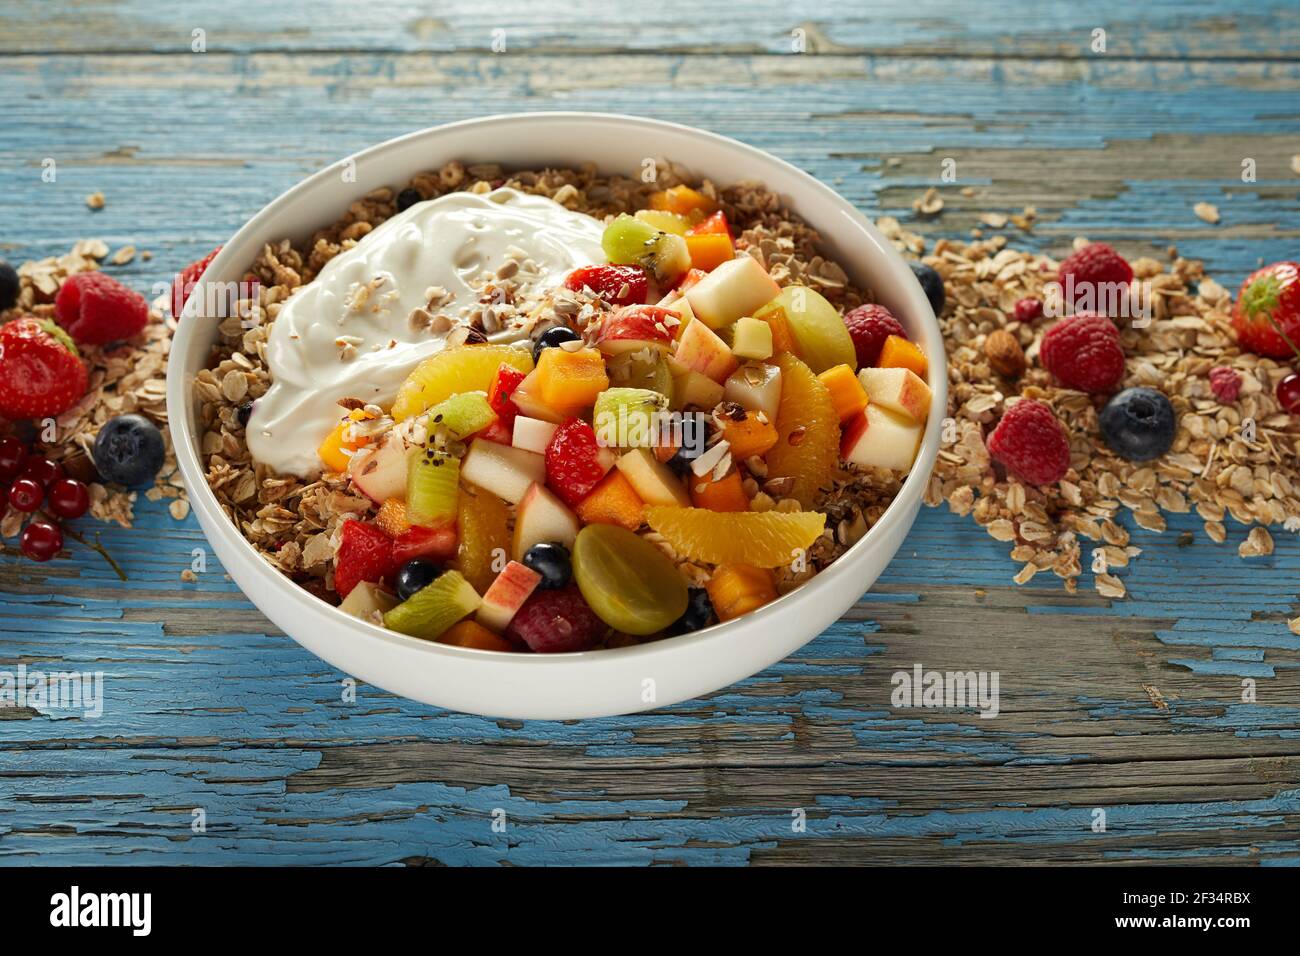 High angle of bowl of muesli served on wooden table with various berries and fruits for healthy nutritious breakfast Stock Photo